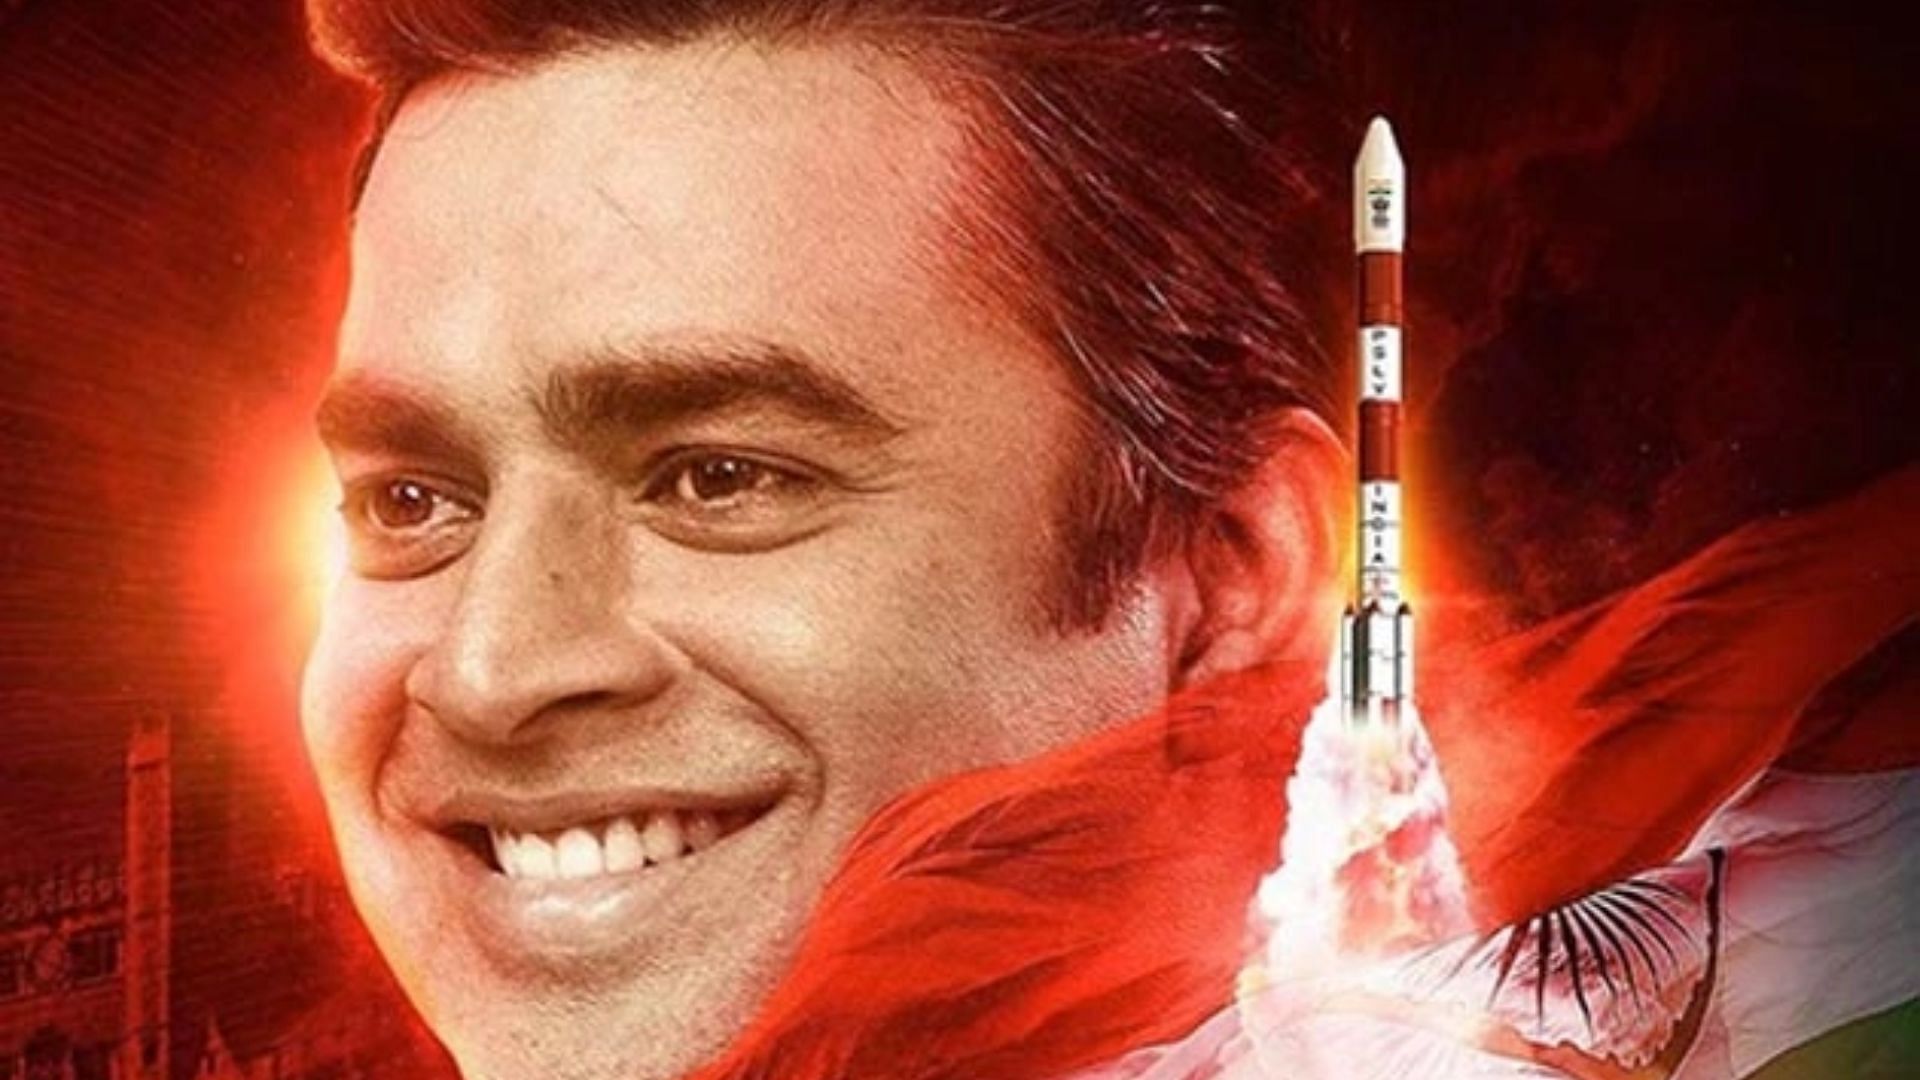 3 Idiots To Rocketry: The Nambi Effect, List Of R Madhavan's Top Films  According To IMDb (